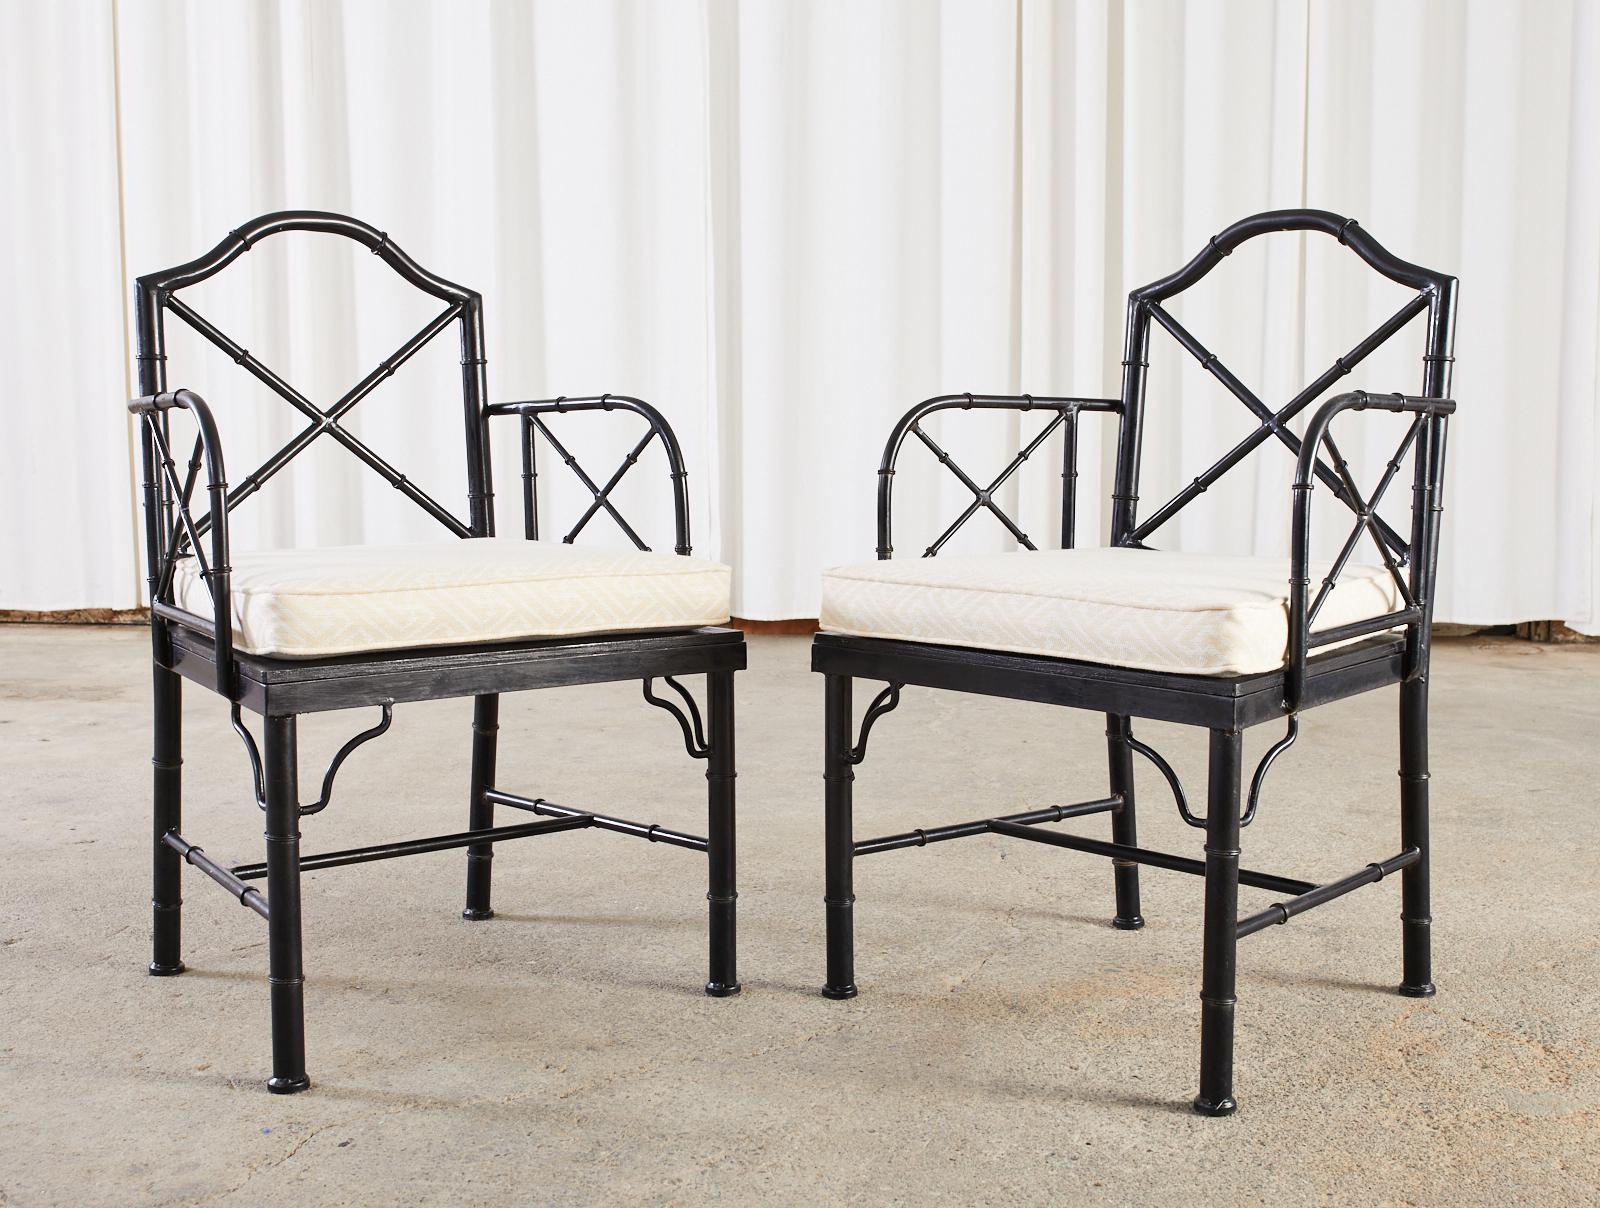 20th Century Chinese Chippendale Faux Bamboo Iron Garden Chairs